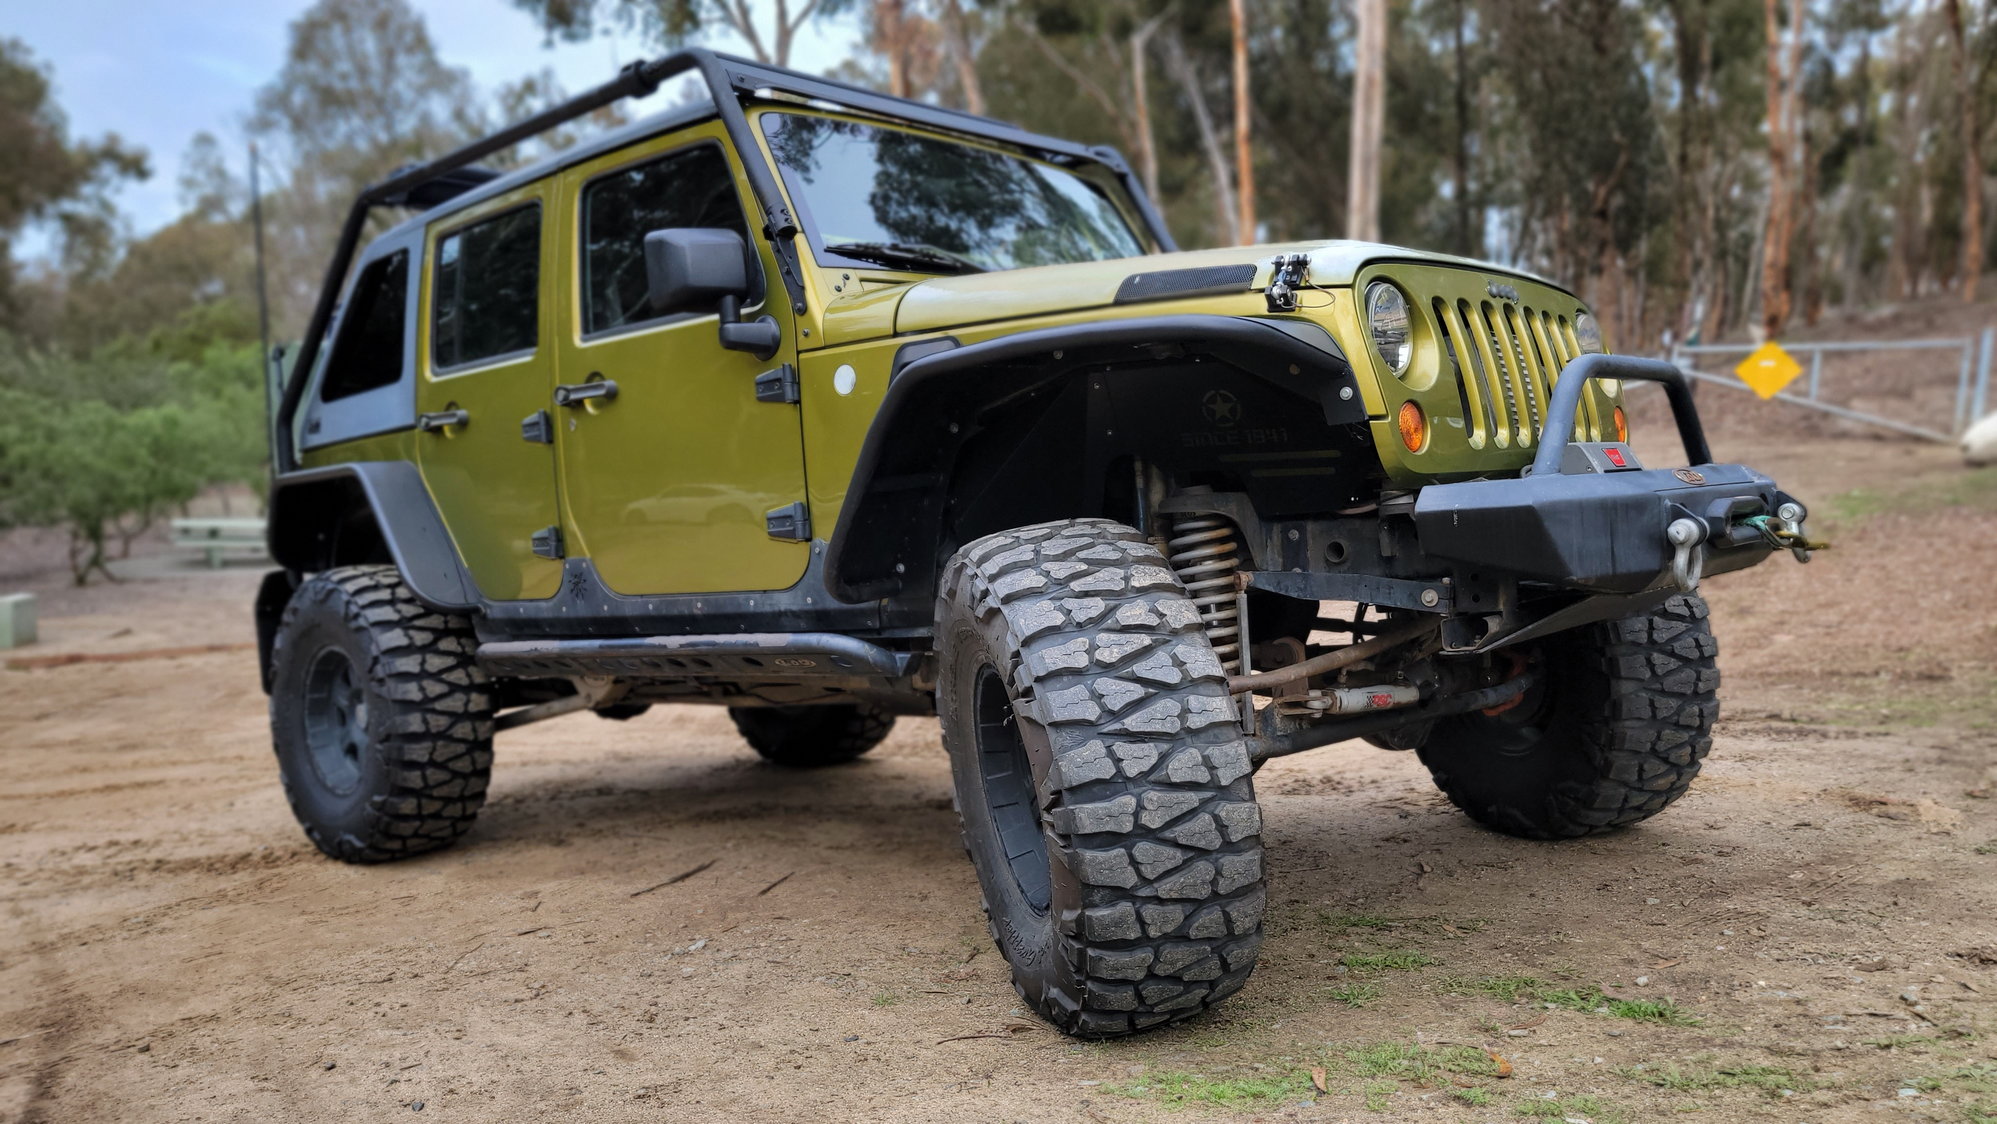 Jeep JK Wrangler Rubicon 2007 4-door - offroad/rock crawl/overland - JK - The top destination for Jeep JK and JL Wrangler news, rumors,  and discussion